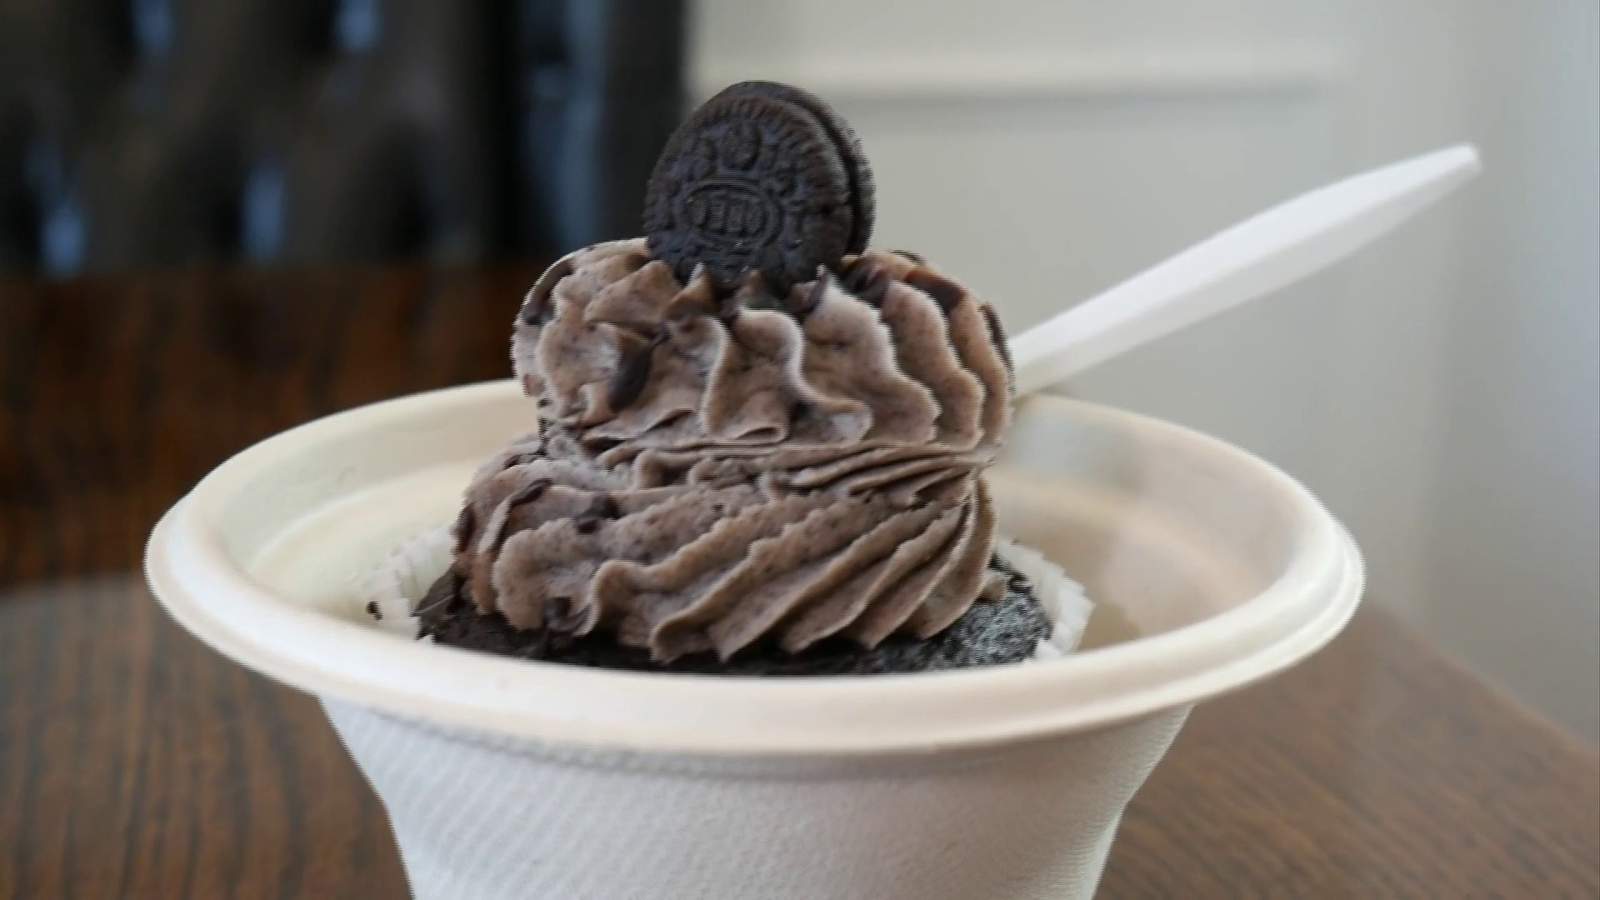 TASTY TUESDAY: Weeks-old Gigi’s Cupcakes takes Christiansburg by the sweet tooth